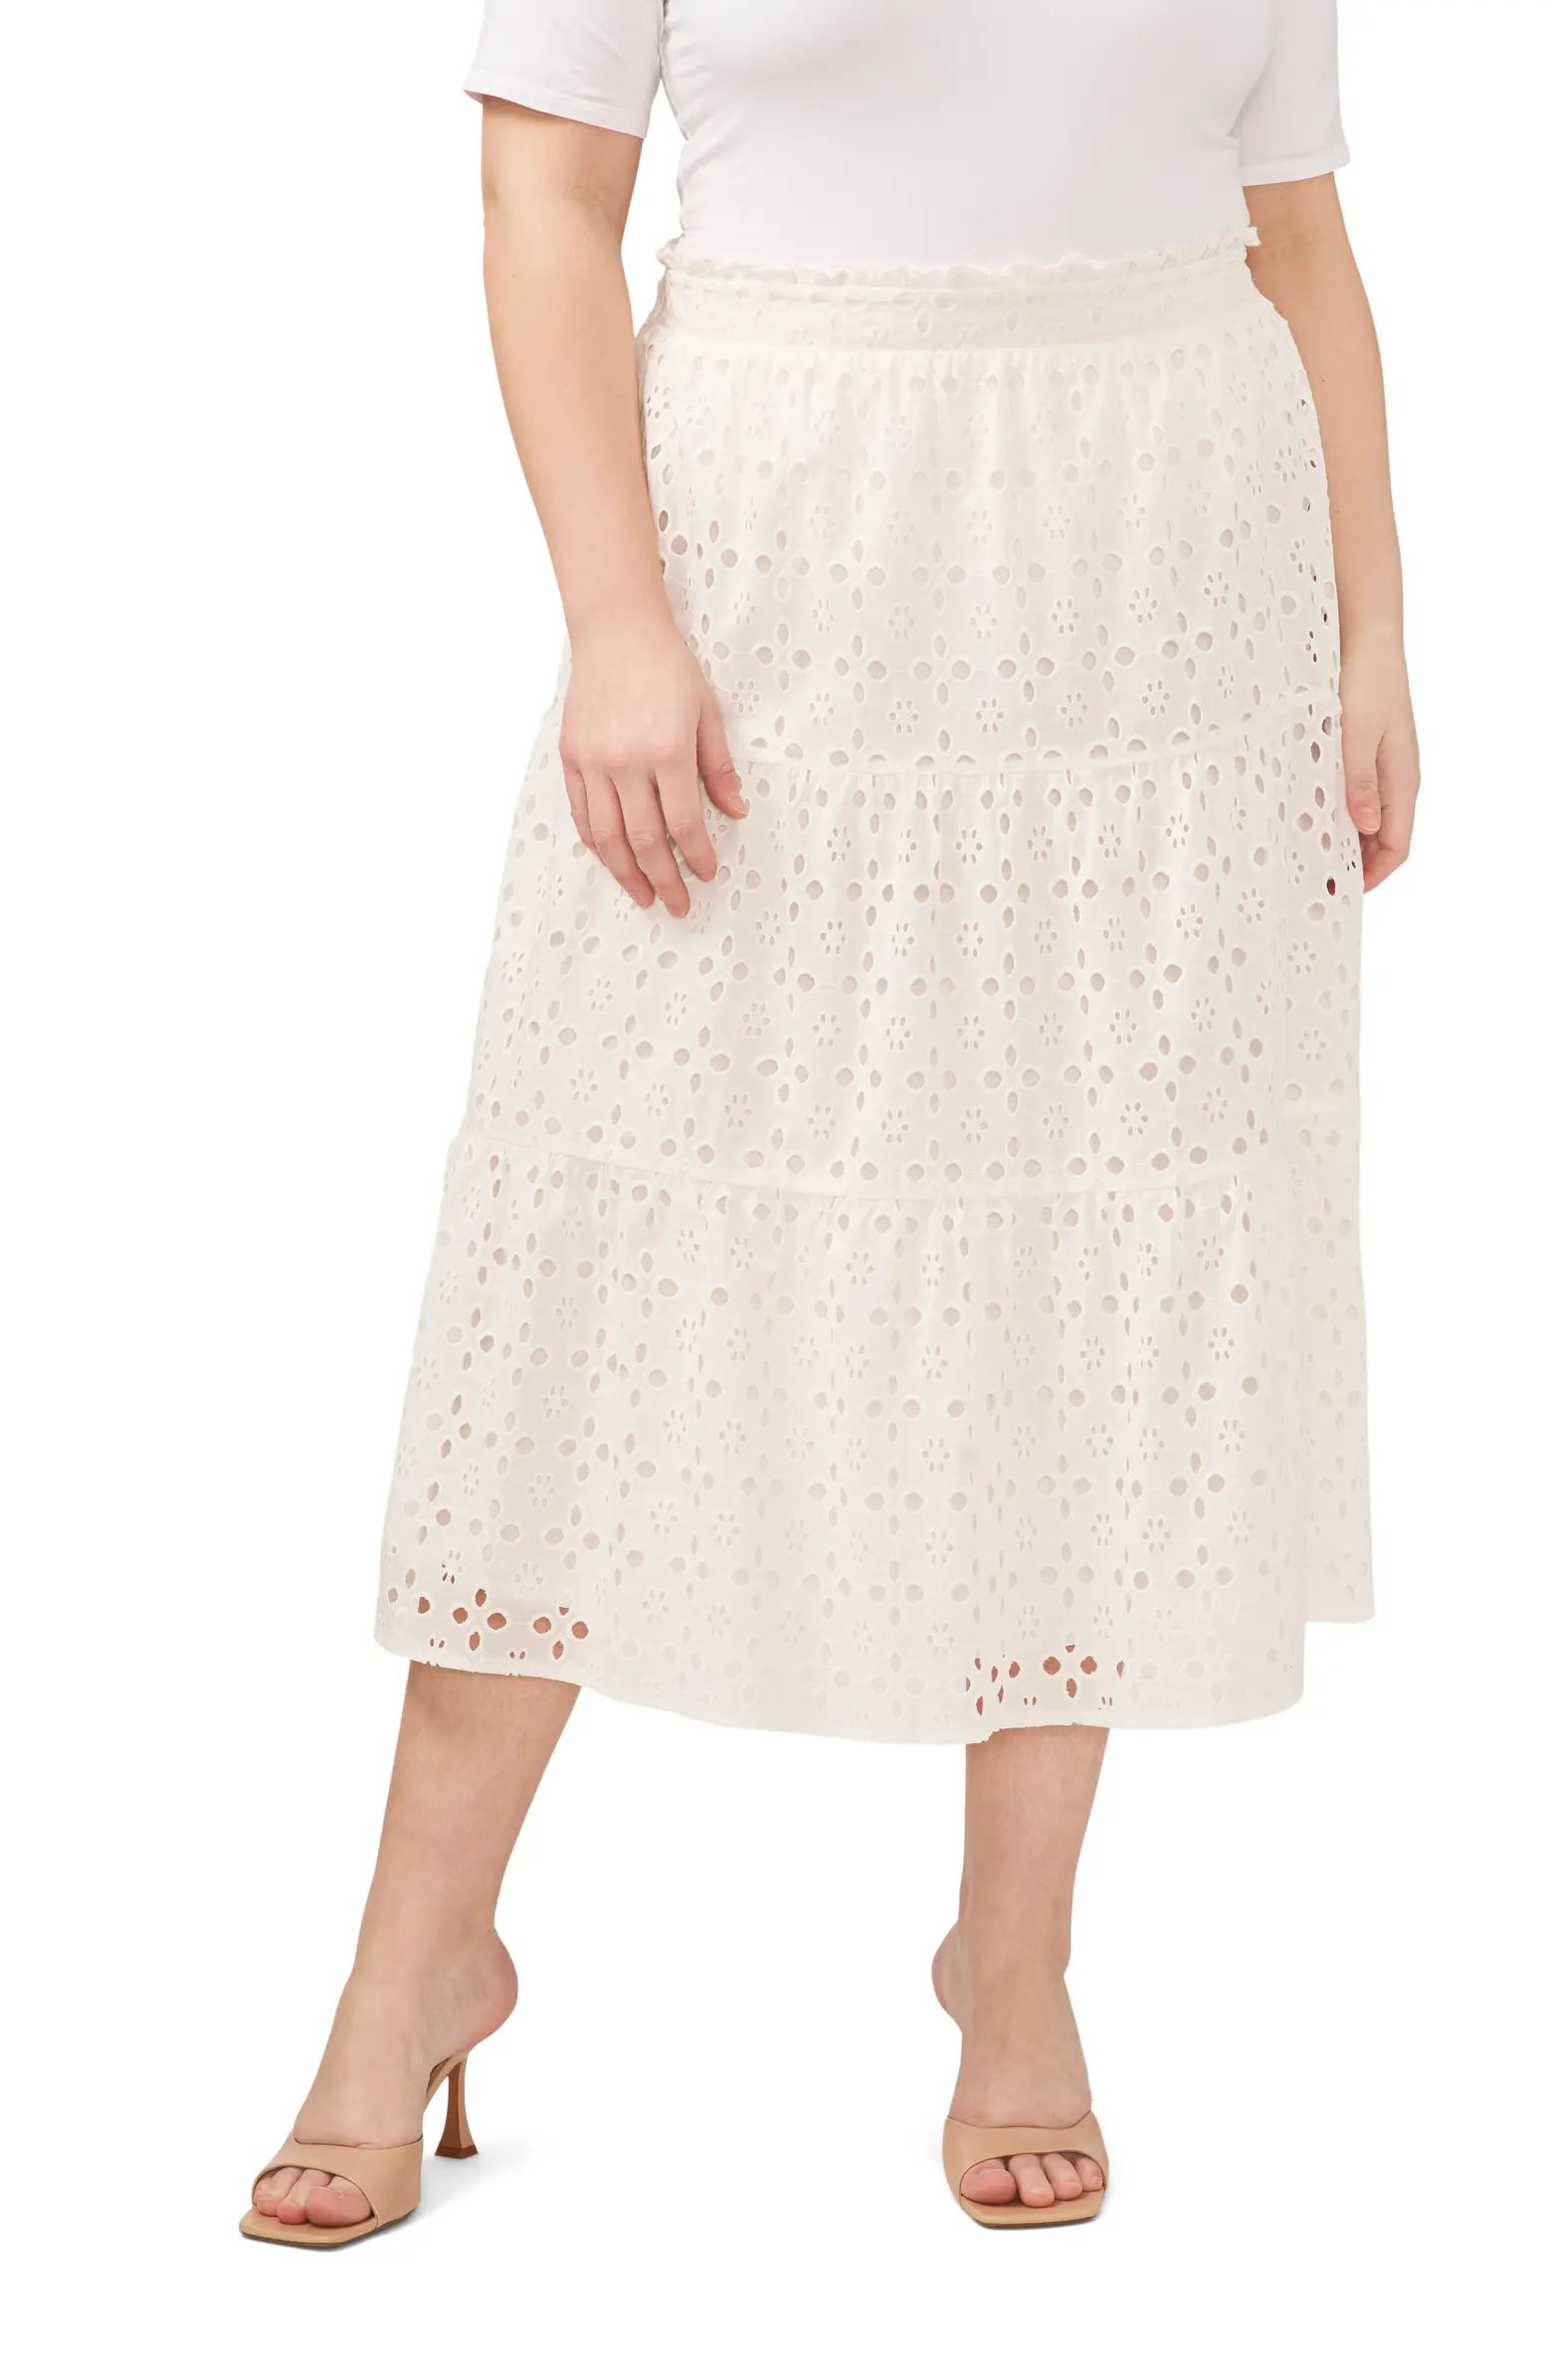 Floral eyelet embroidery adorns this airy cotton midi skirt that adds sunny-weather charm to any ... | Nordstrom